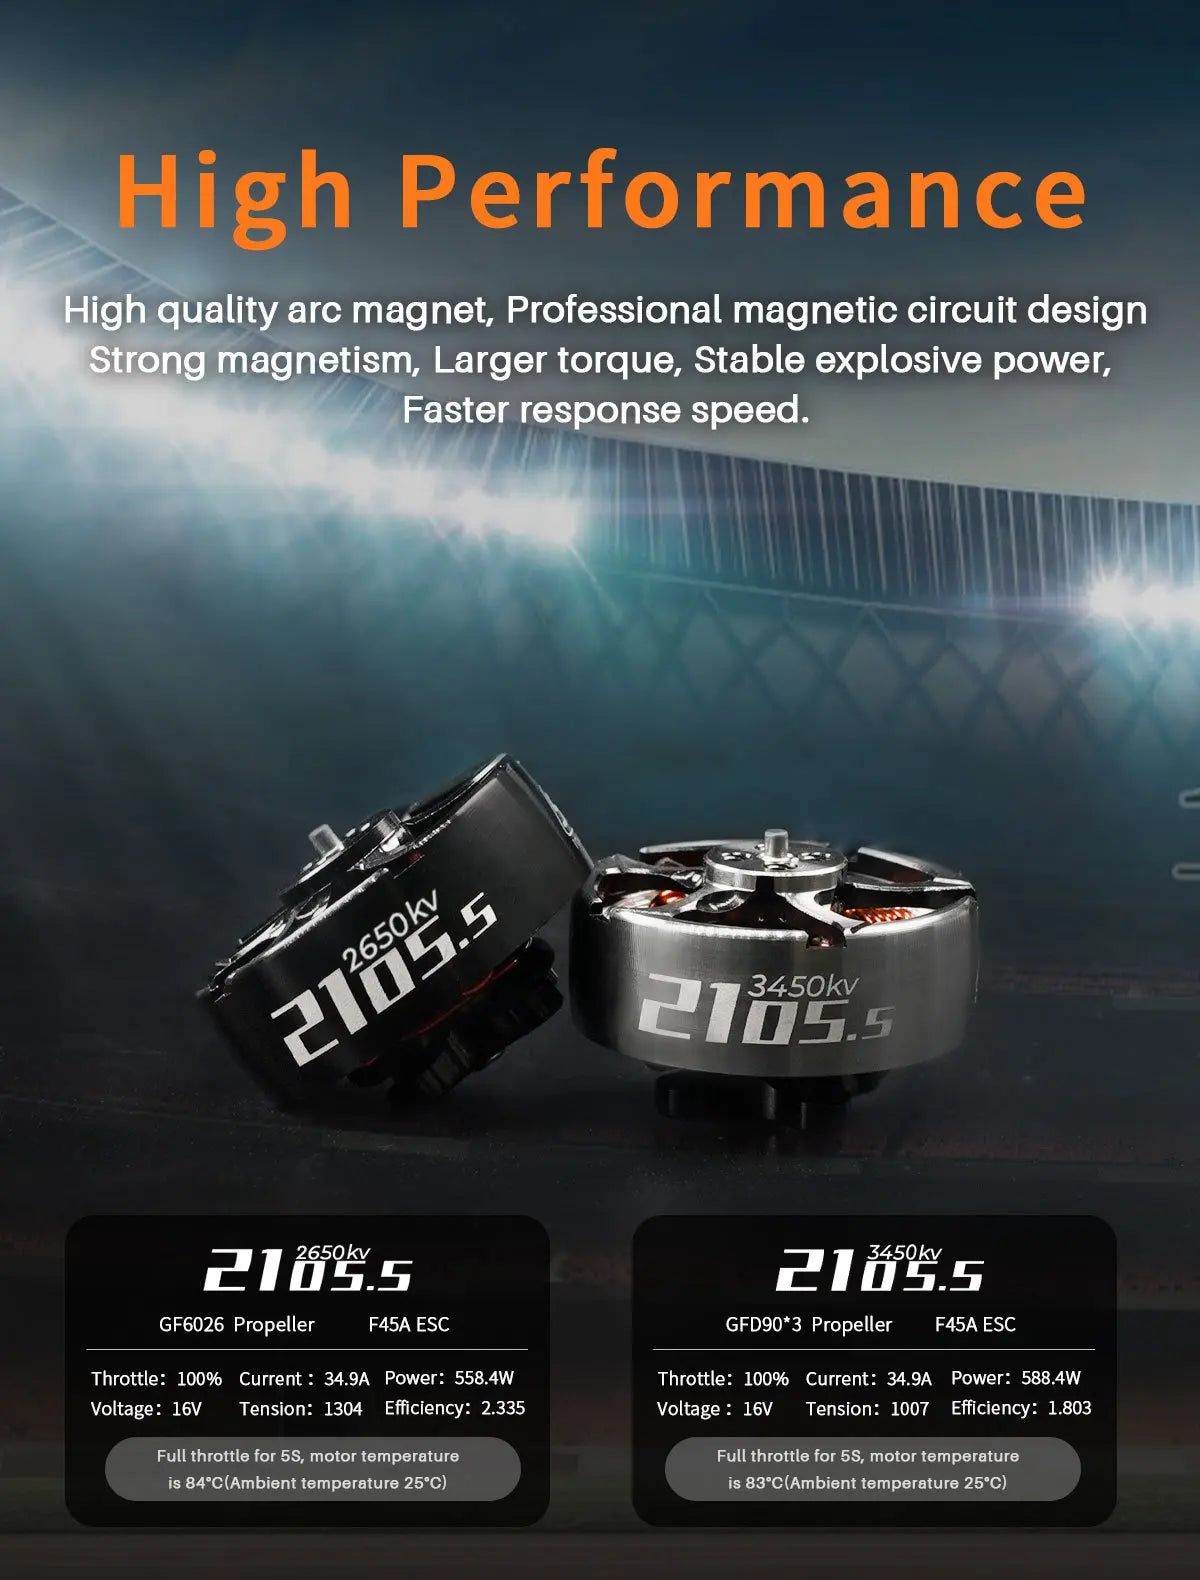 GEPRC SPEEDX2 0803 Brushless Motor, High Performance High quality arc magnet; Professional magnetic circuit design Strong magnetism; Larger